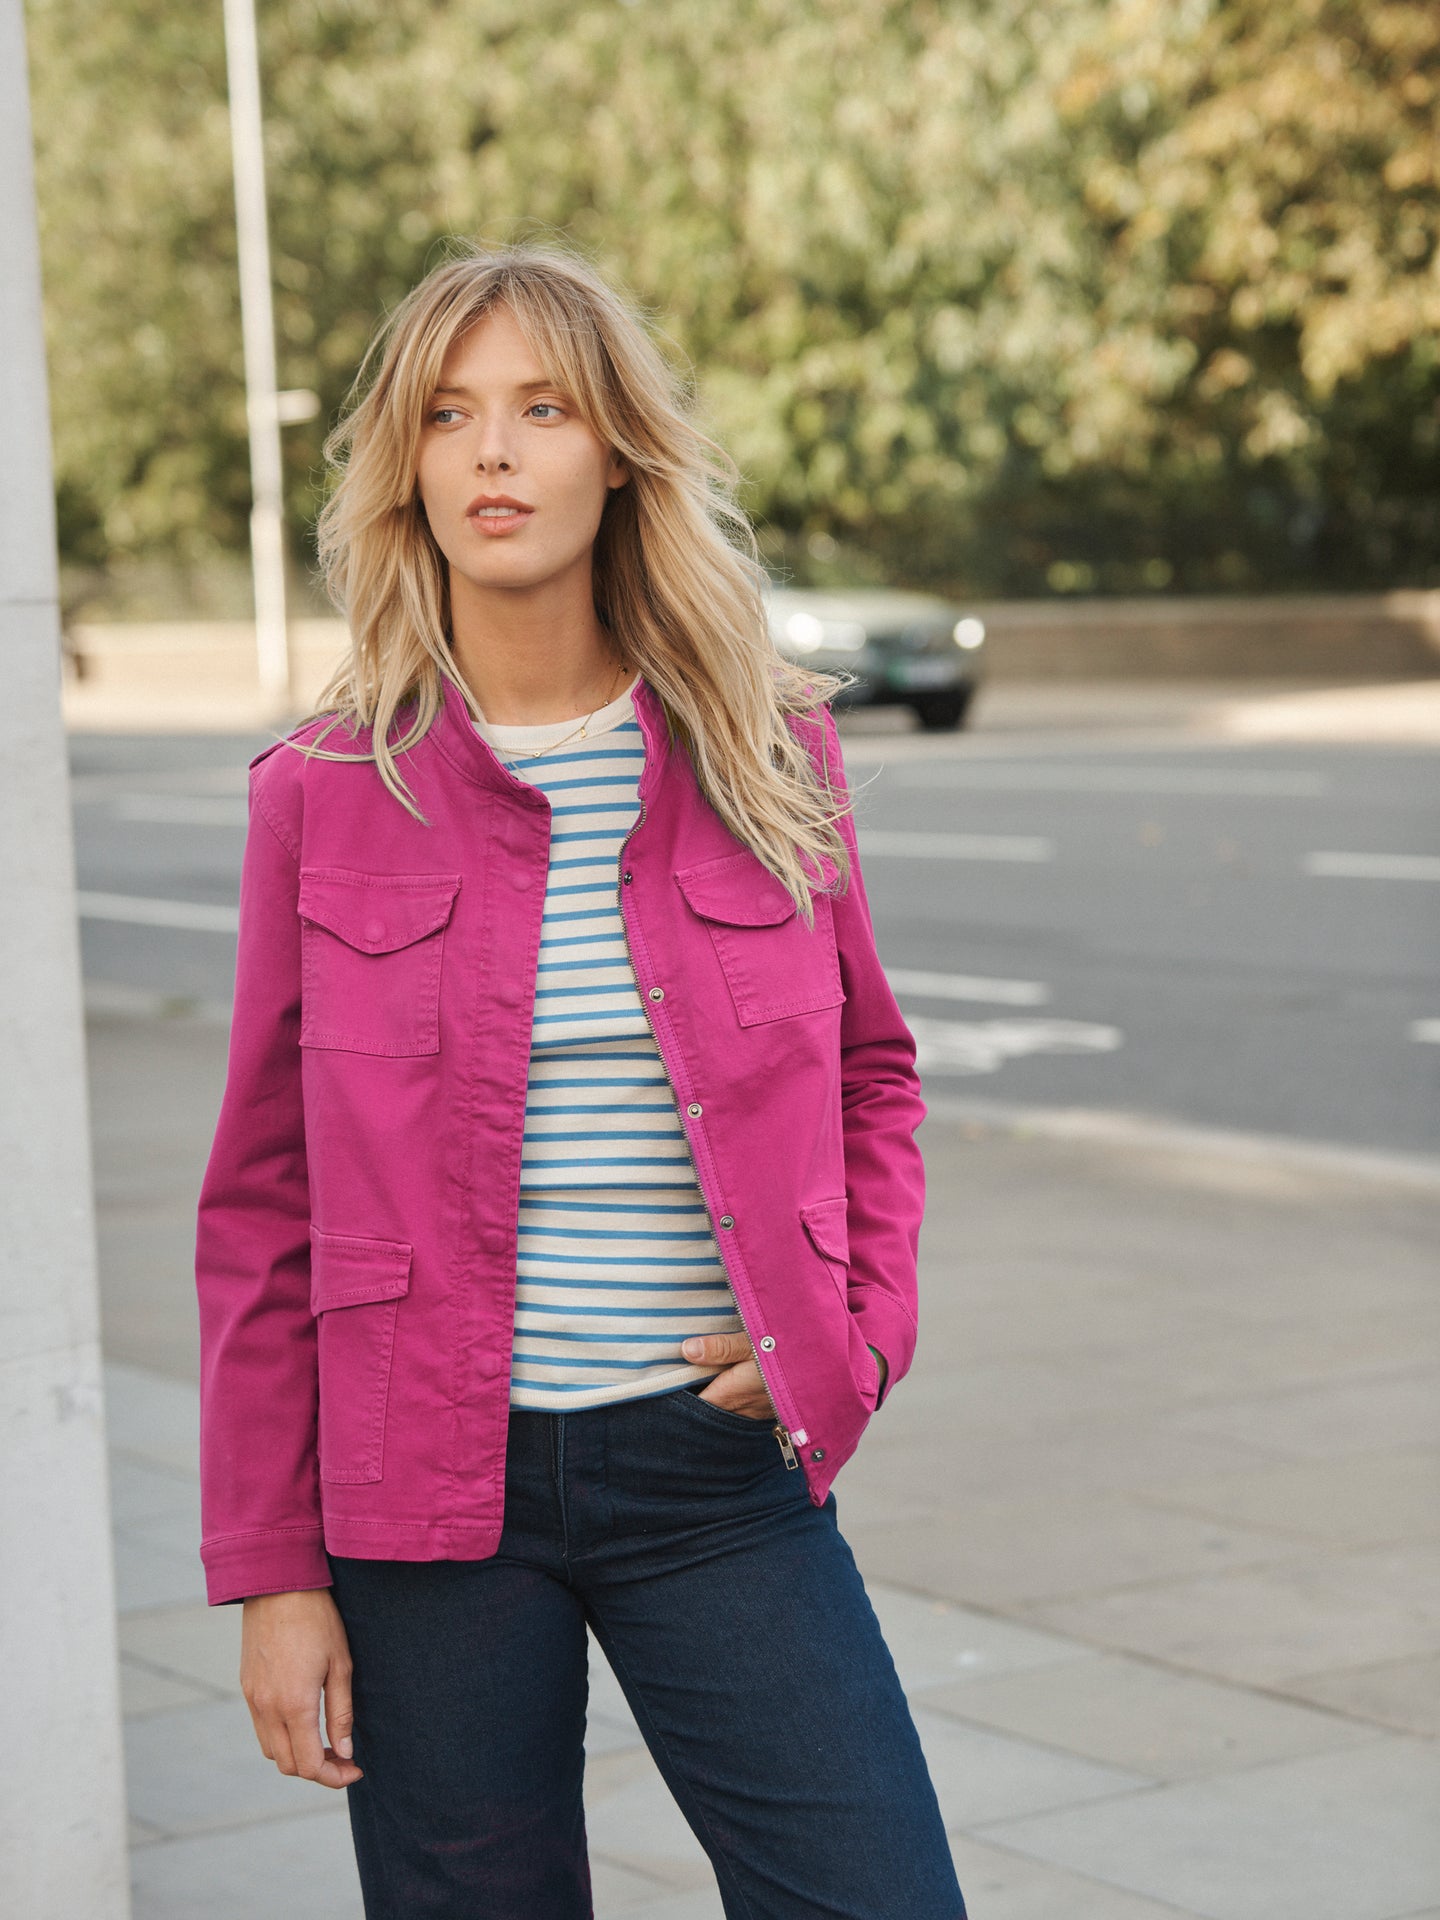 Versatile, Comfortable and Stylish Jackets and Coats | NRBY Clothing